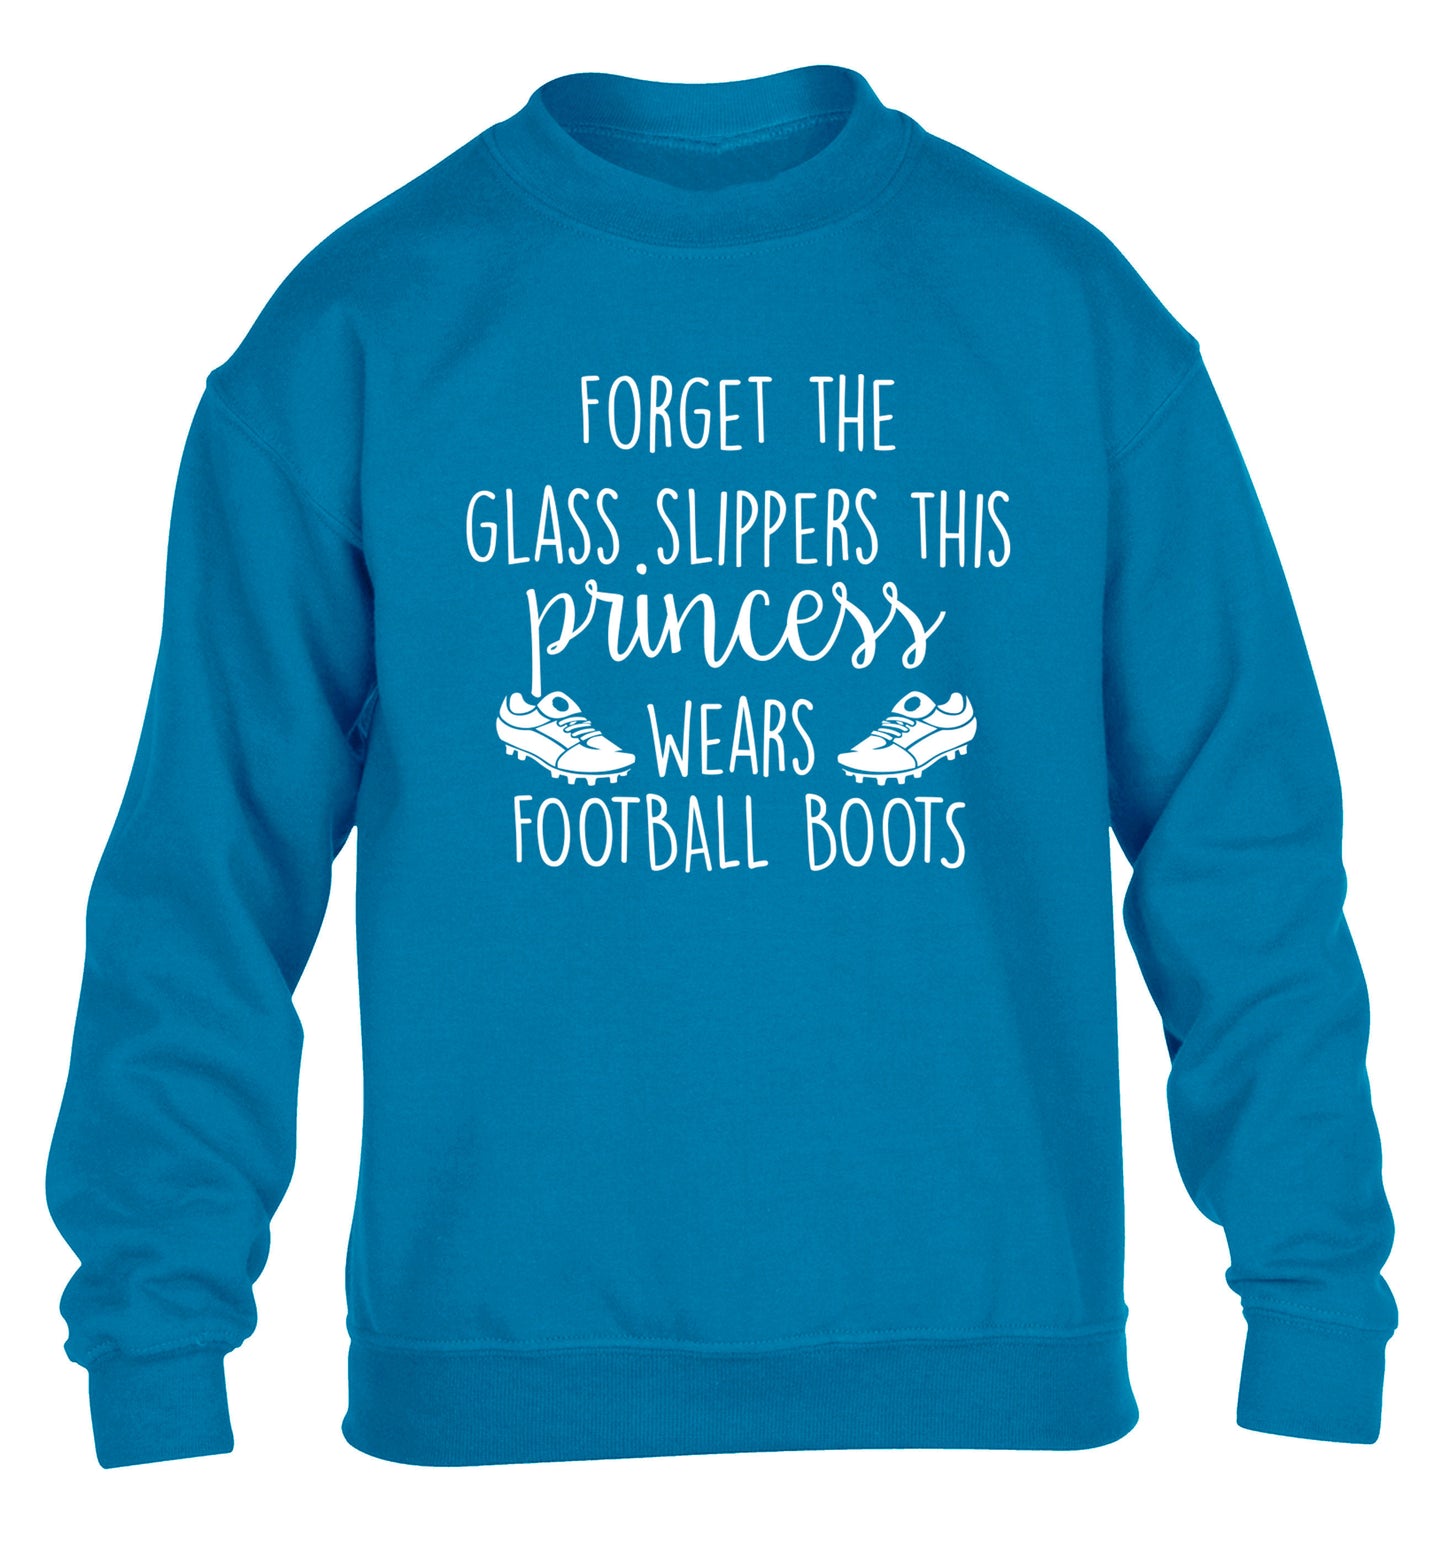 Forget the glass slippers this princess wears football boots children's blue sweater 12-14 Years